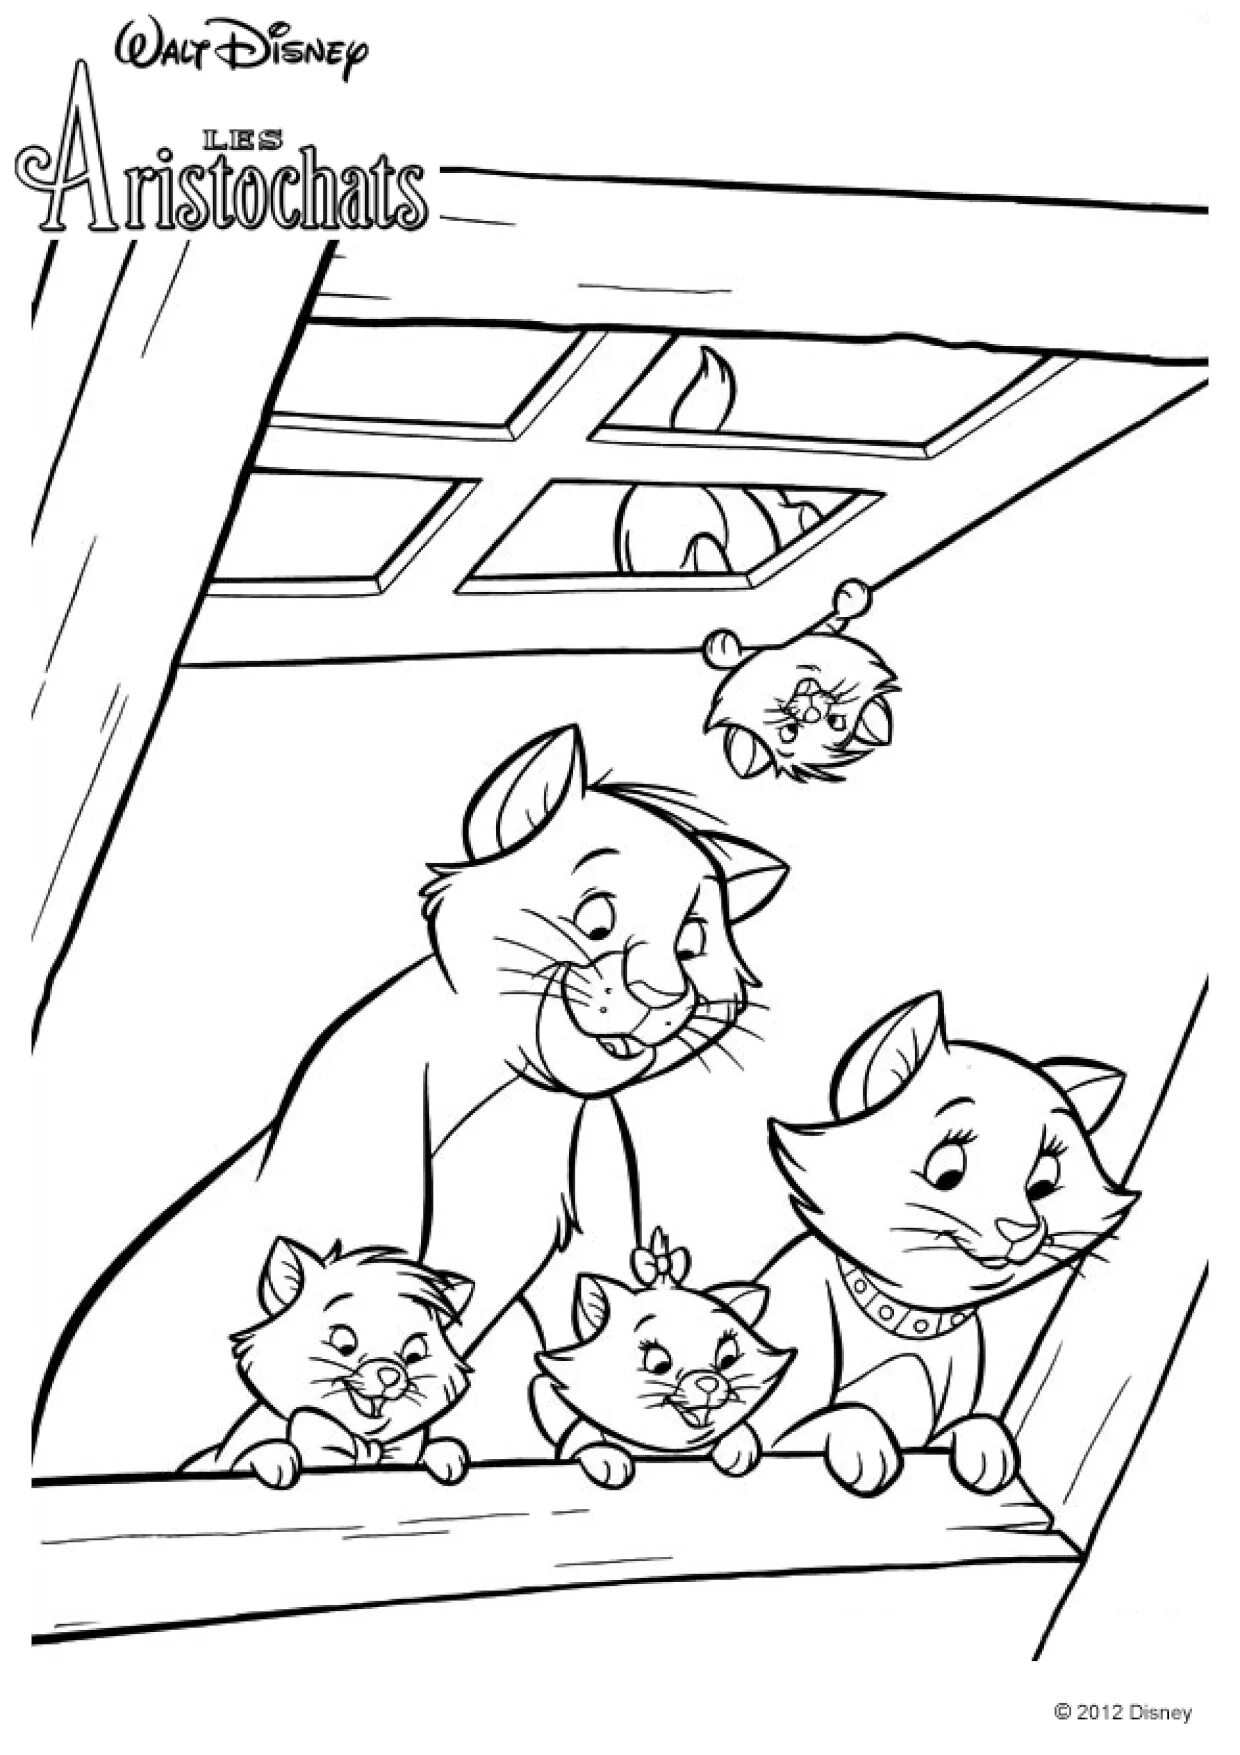 Cat family maintenance coloring page